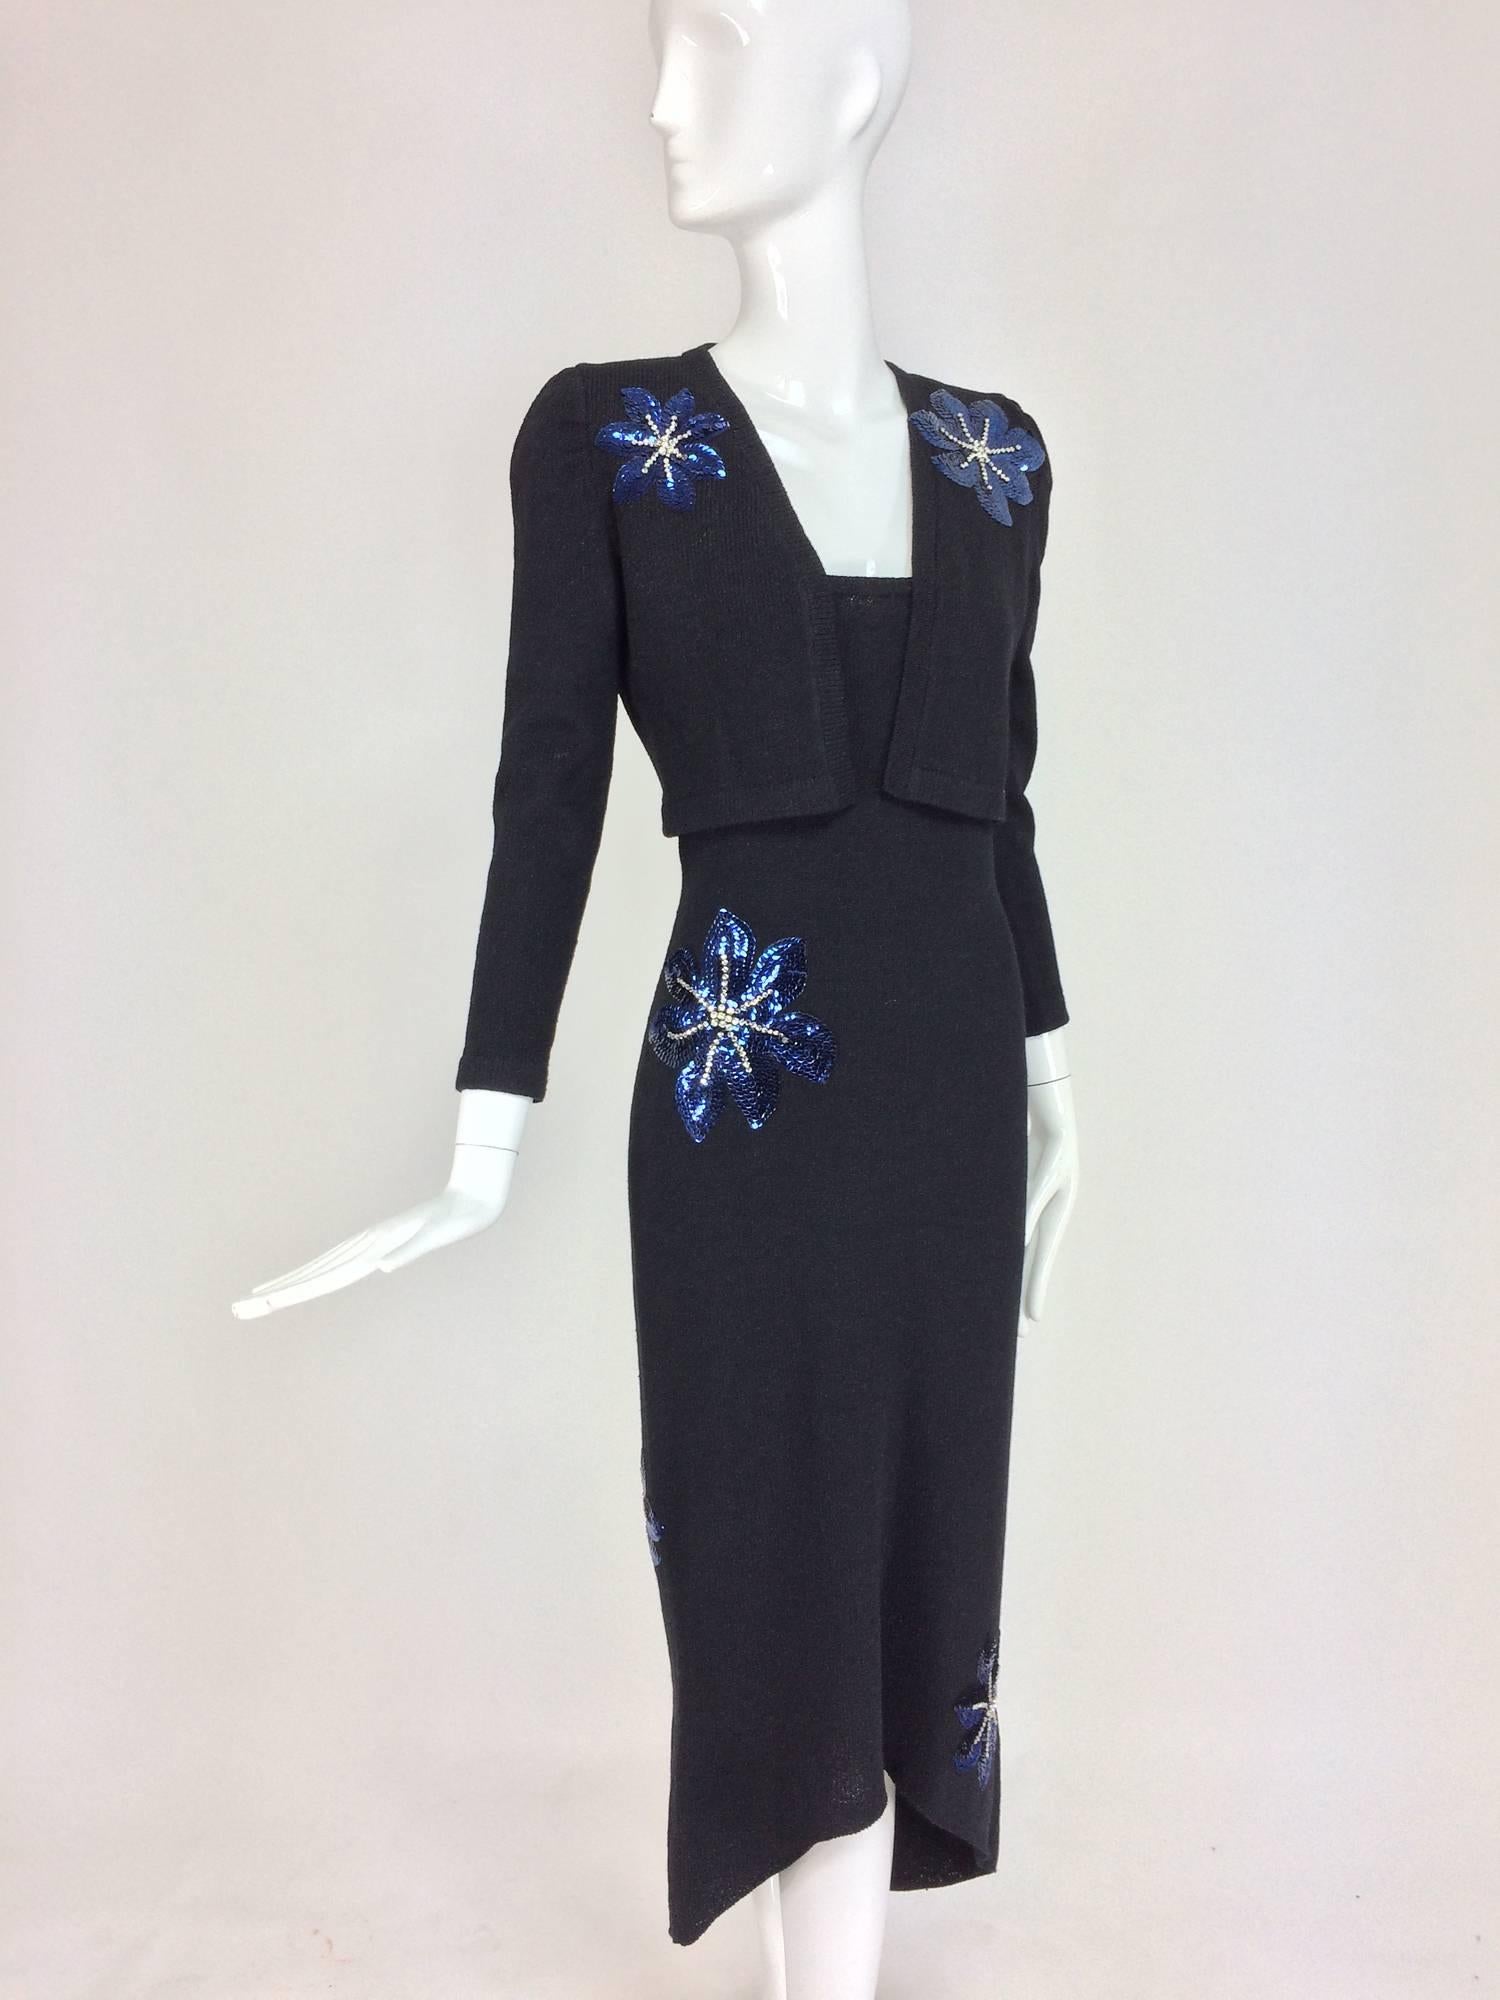 Women's Adolfo 2pc black knit strapless dress and jacket with sequin flowers 1970s